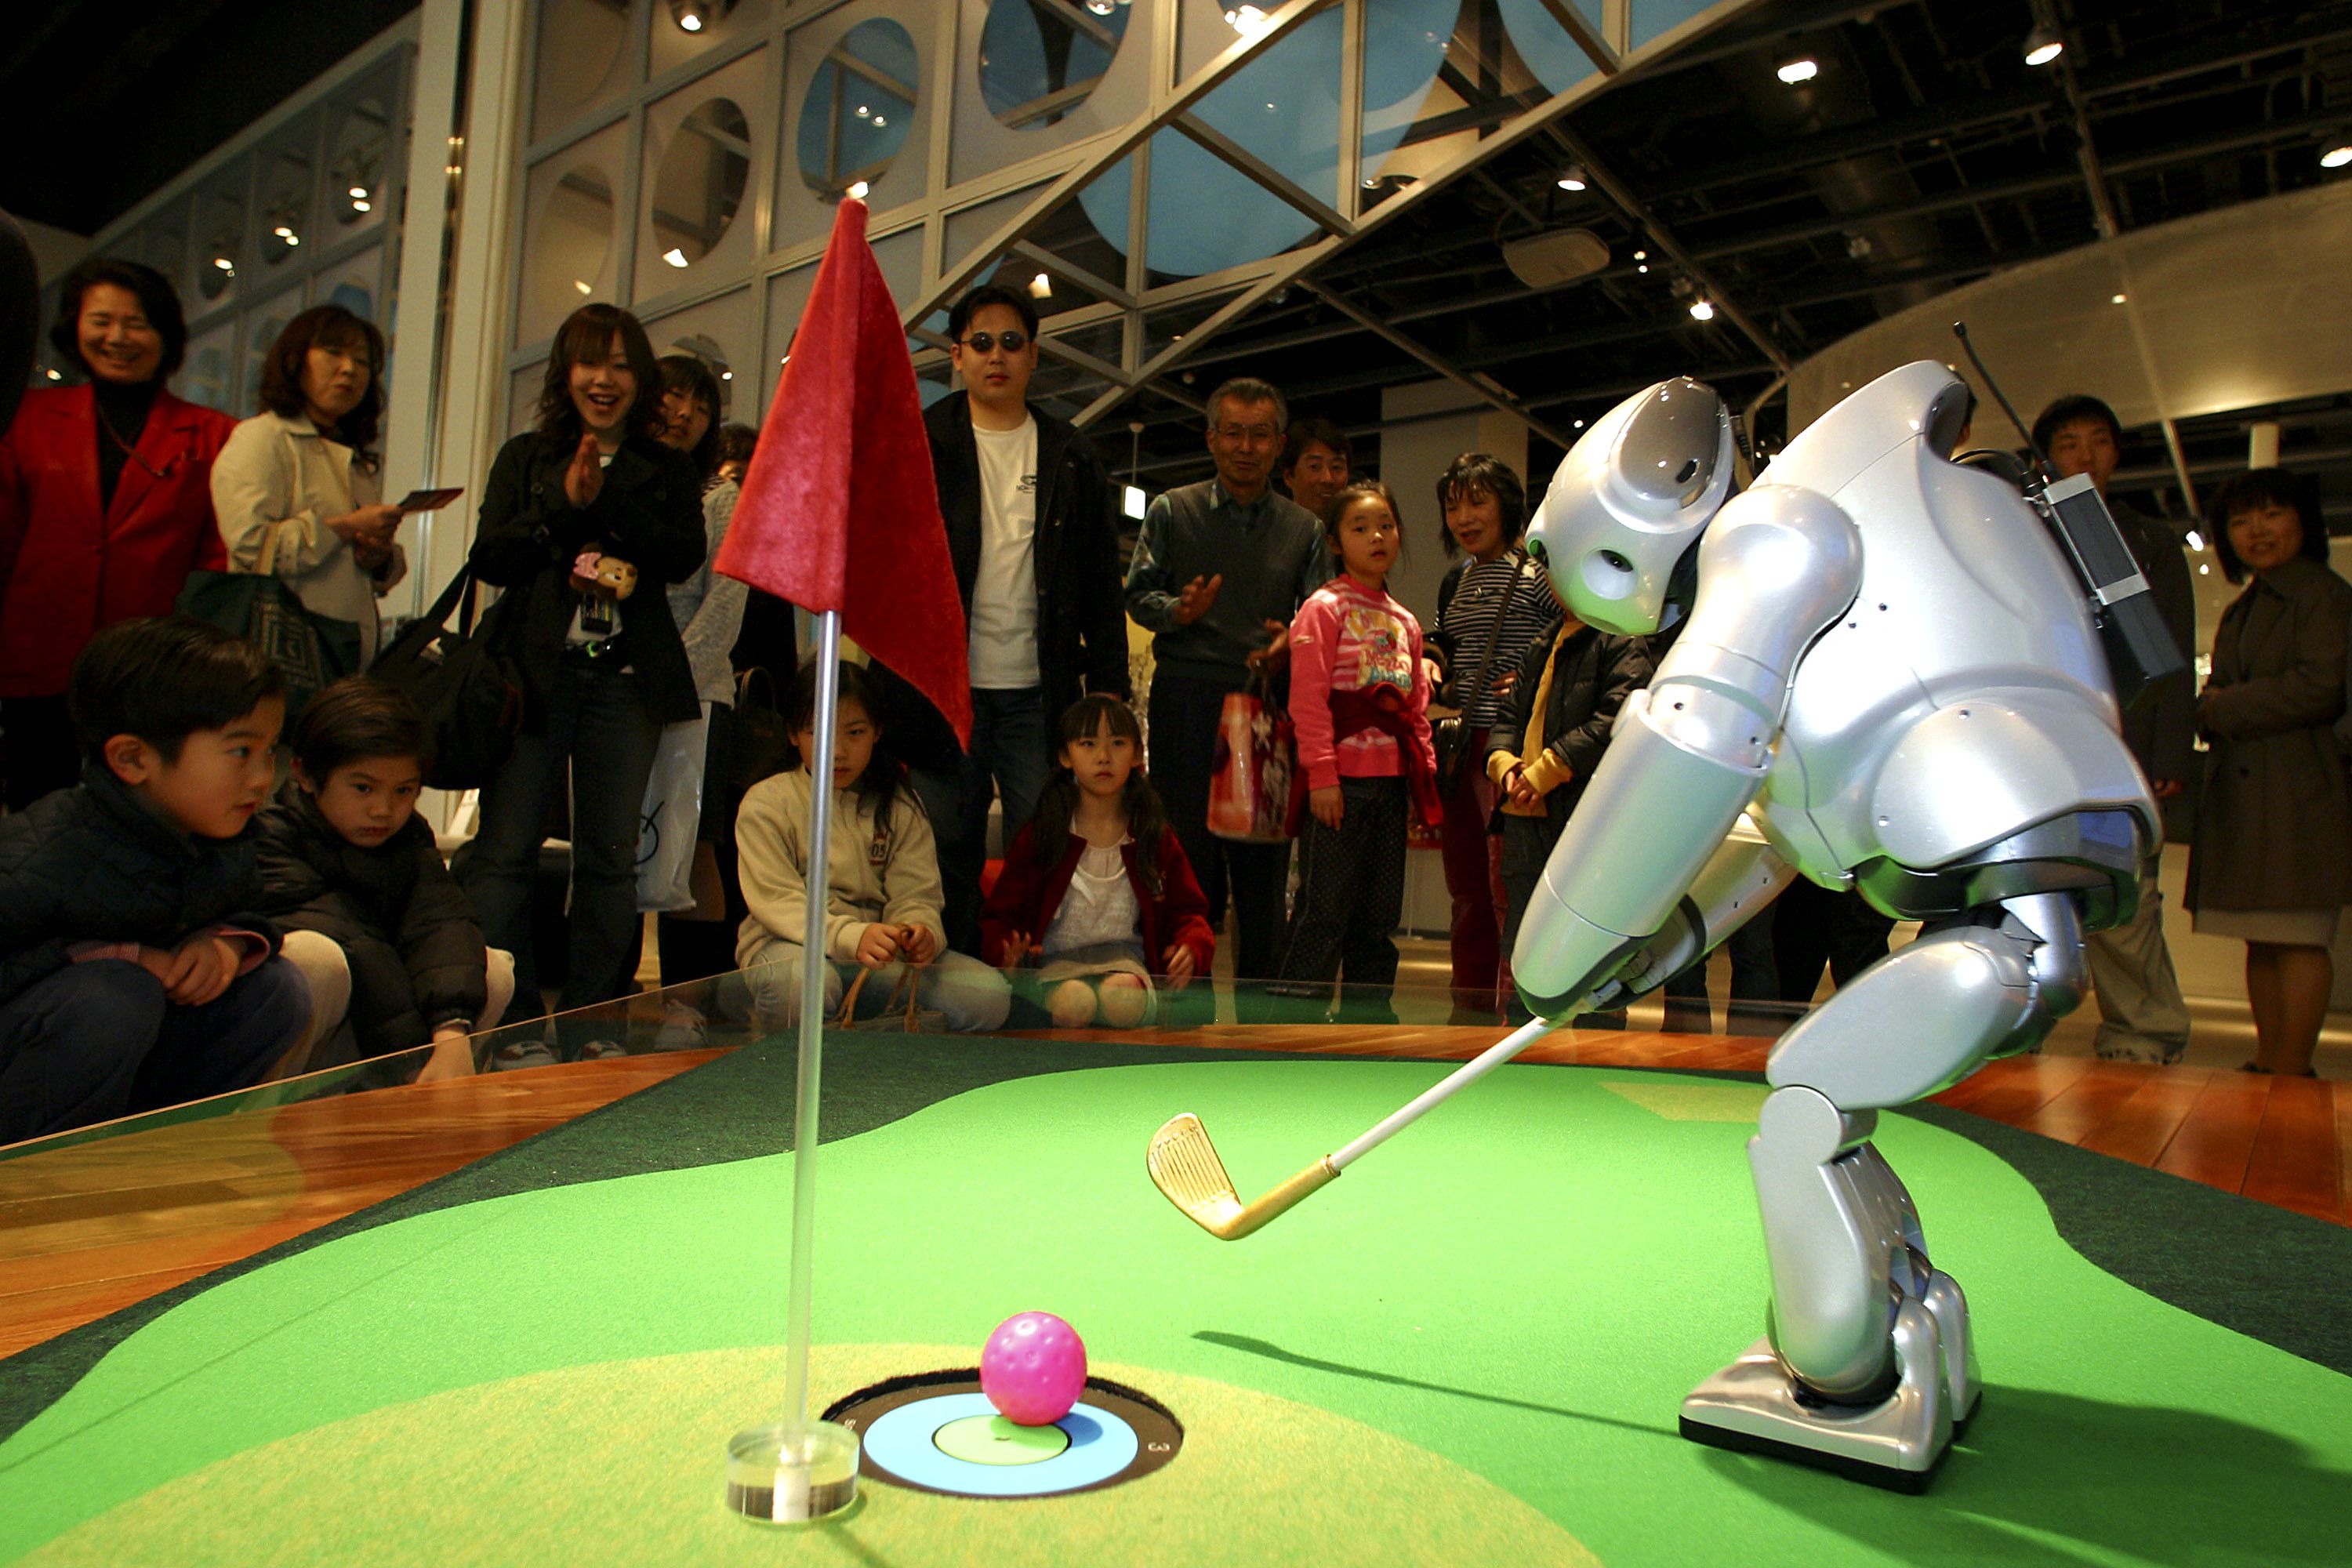 RoboPutt: Rise of the golfing machines?